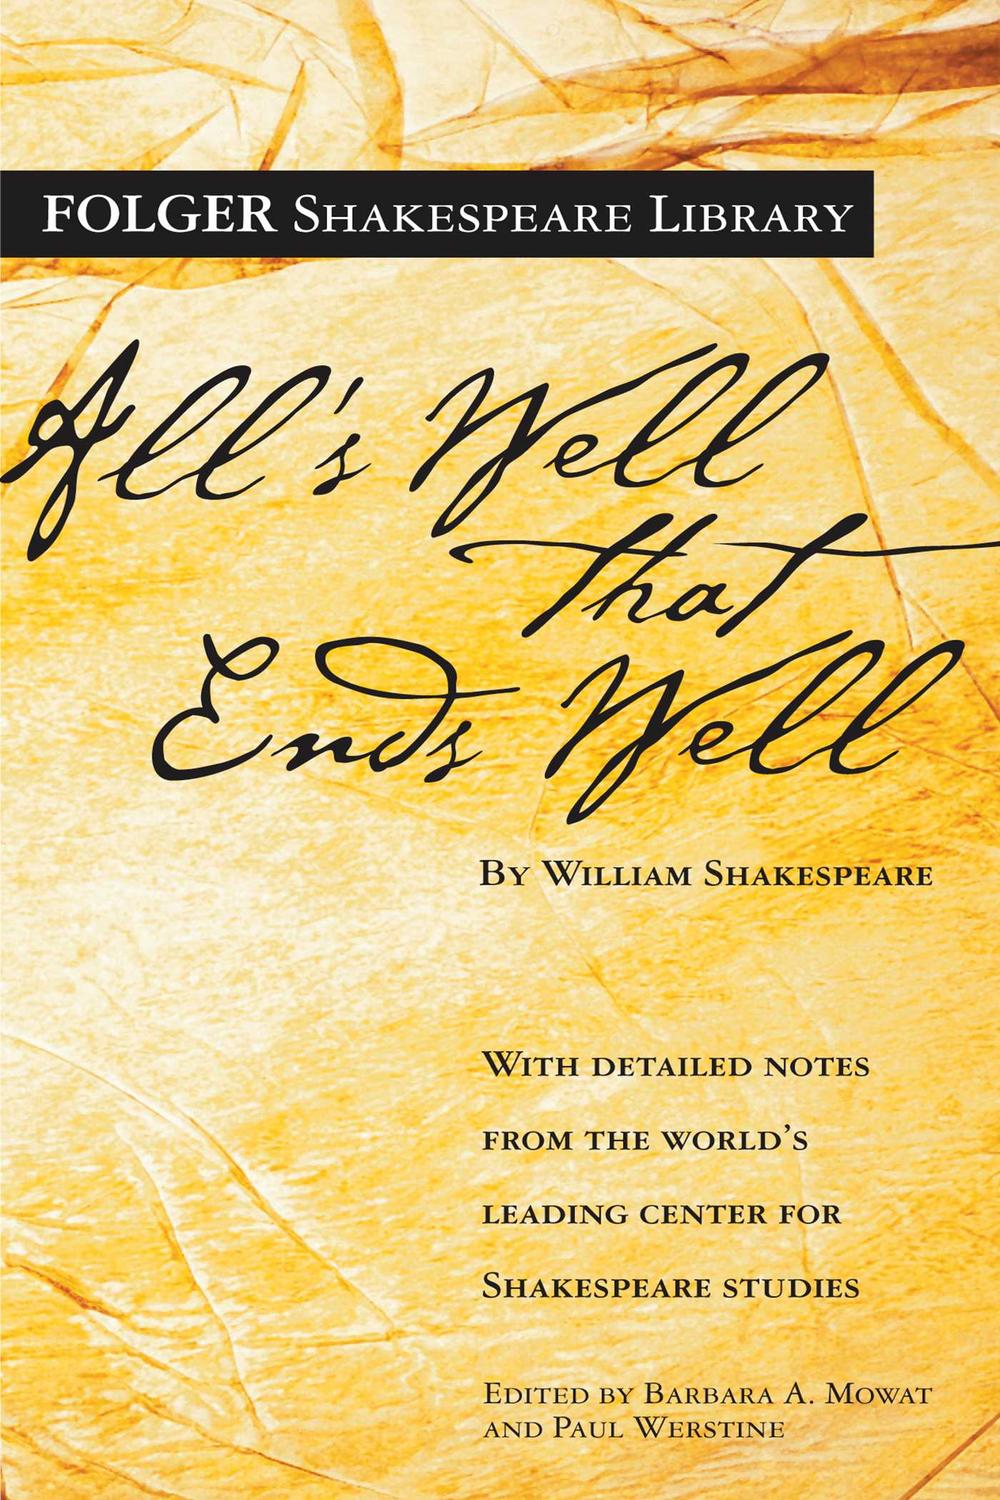 All's Well That Ends Well - William Shakespeare,,Dr. Barbara A. Mowat, Paul Werstine